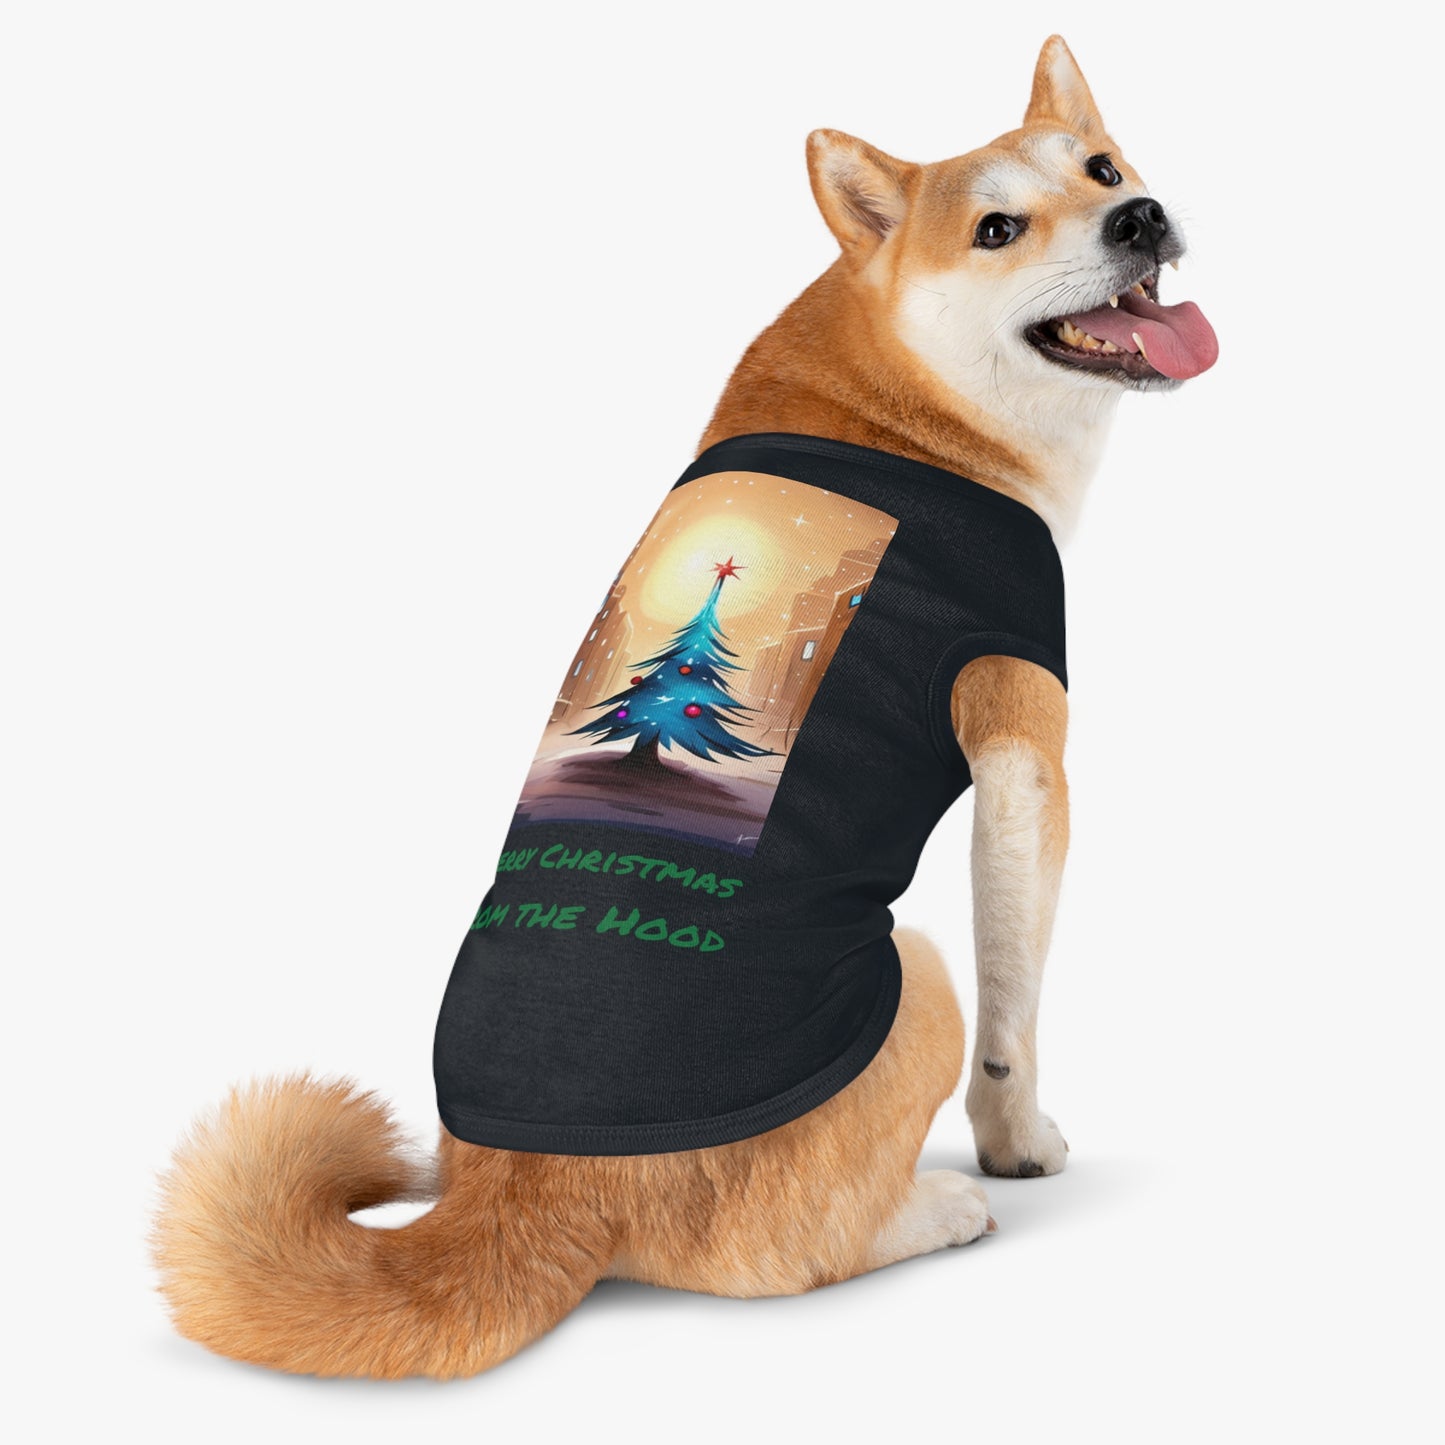 Extra Large Size Merry Christmas From the Hood Dog Shirt